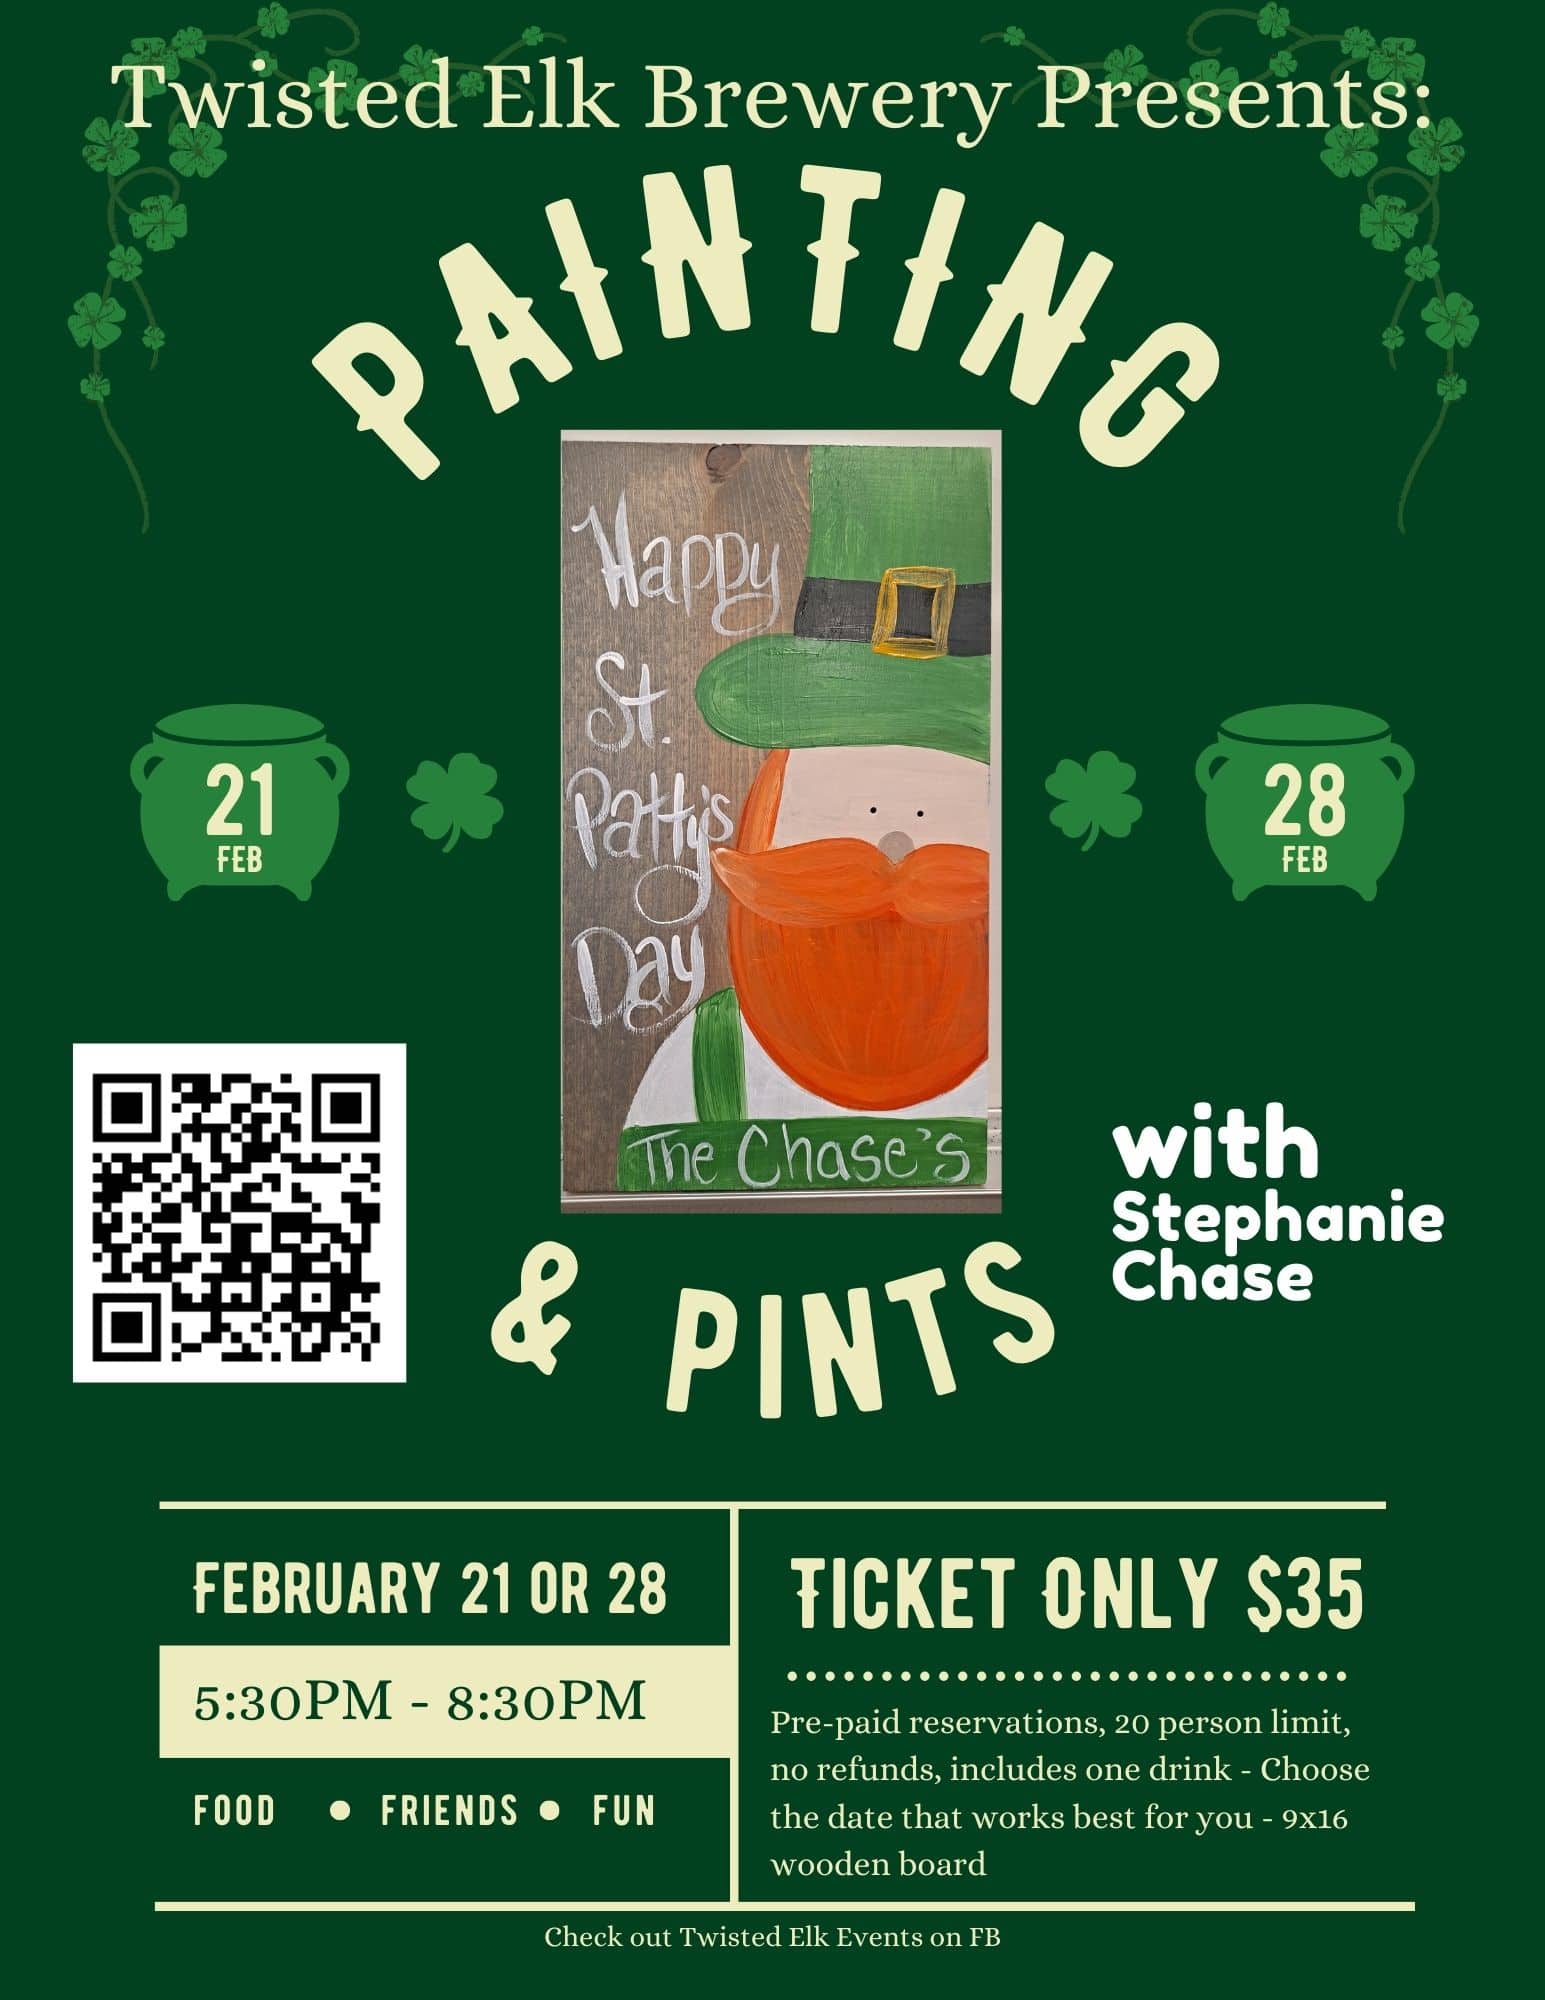 Painting & Pints with Steph